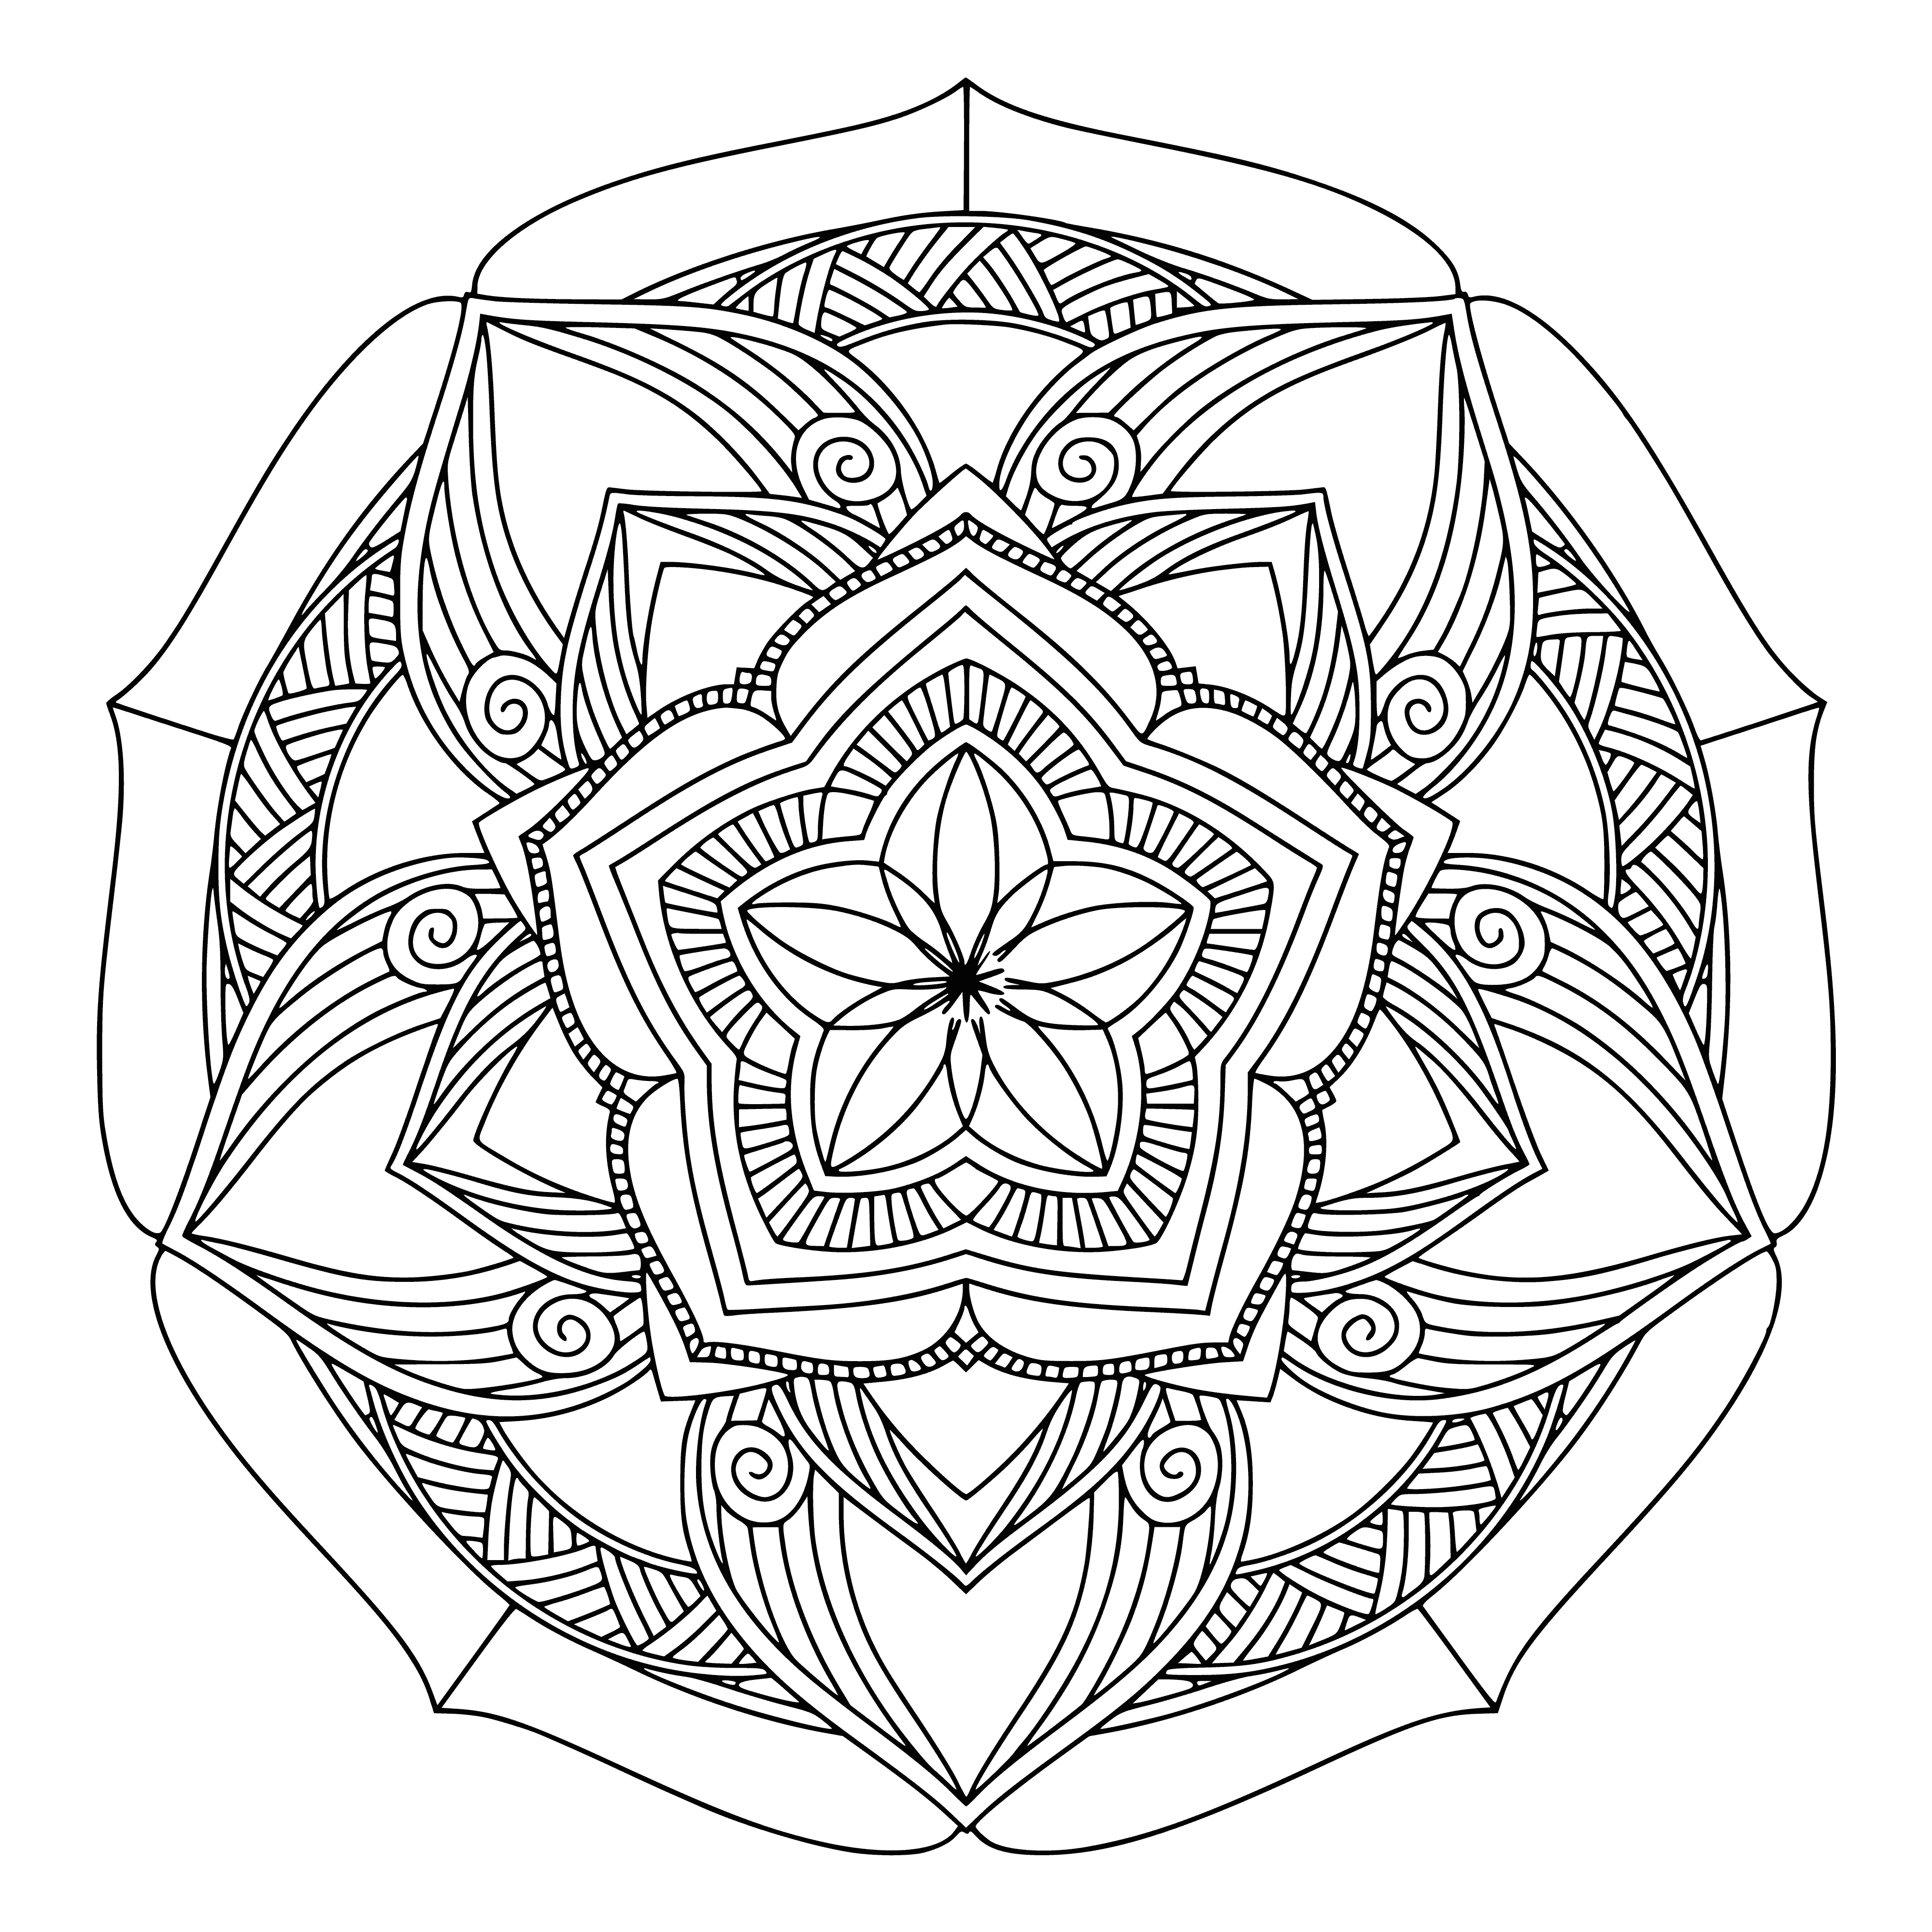 coloring page: A central flower with 8 petals of different colors, surrounded by leaves and a white background: a perfect fit of different shapes. #beauty